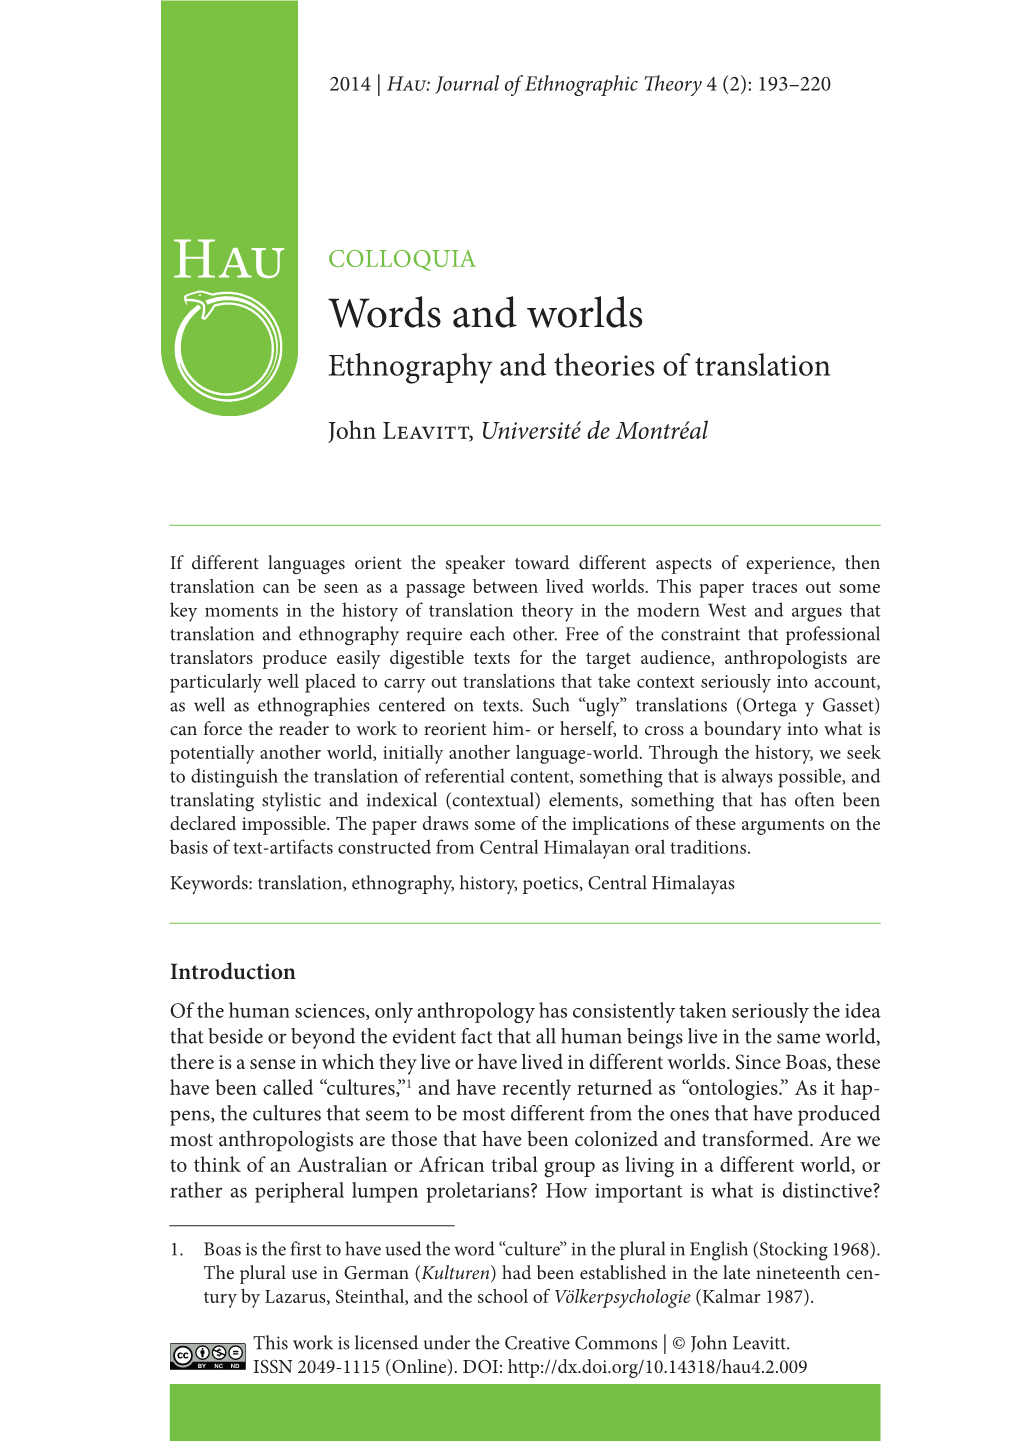 Words and Worlds Ethnography and Theories of Translation